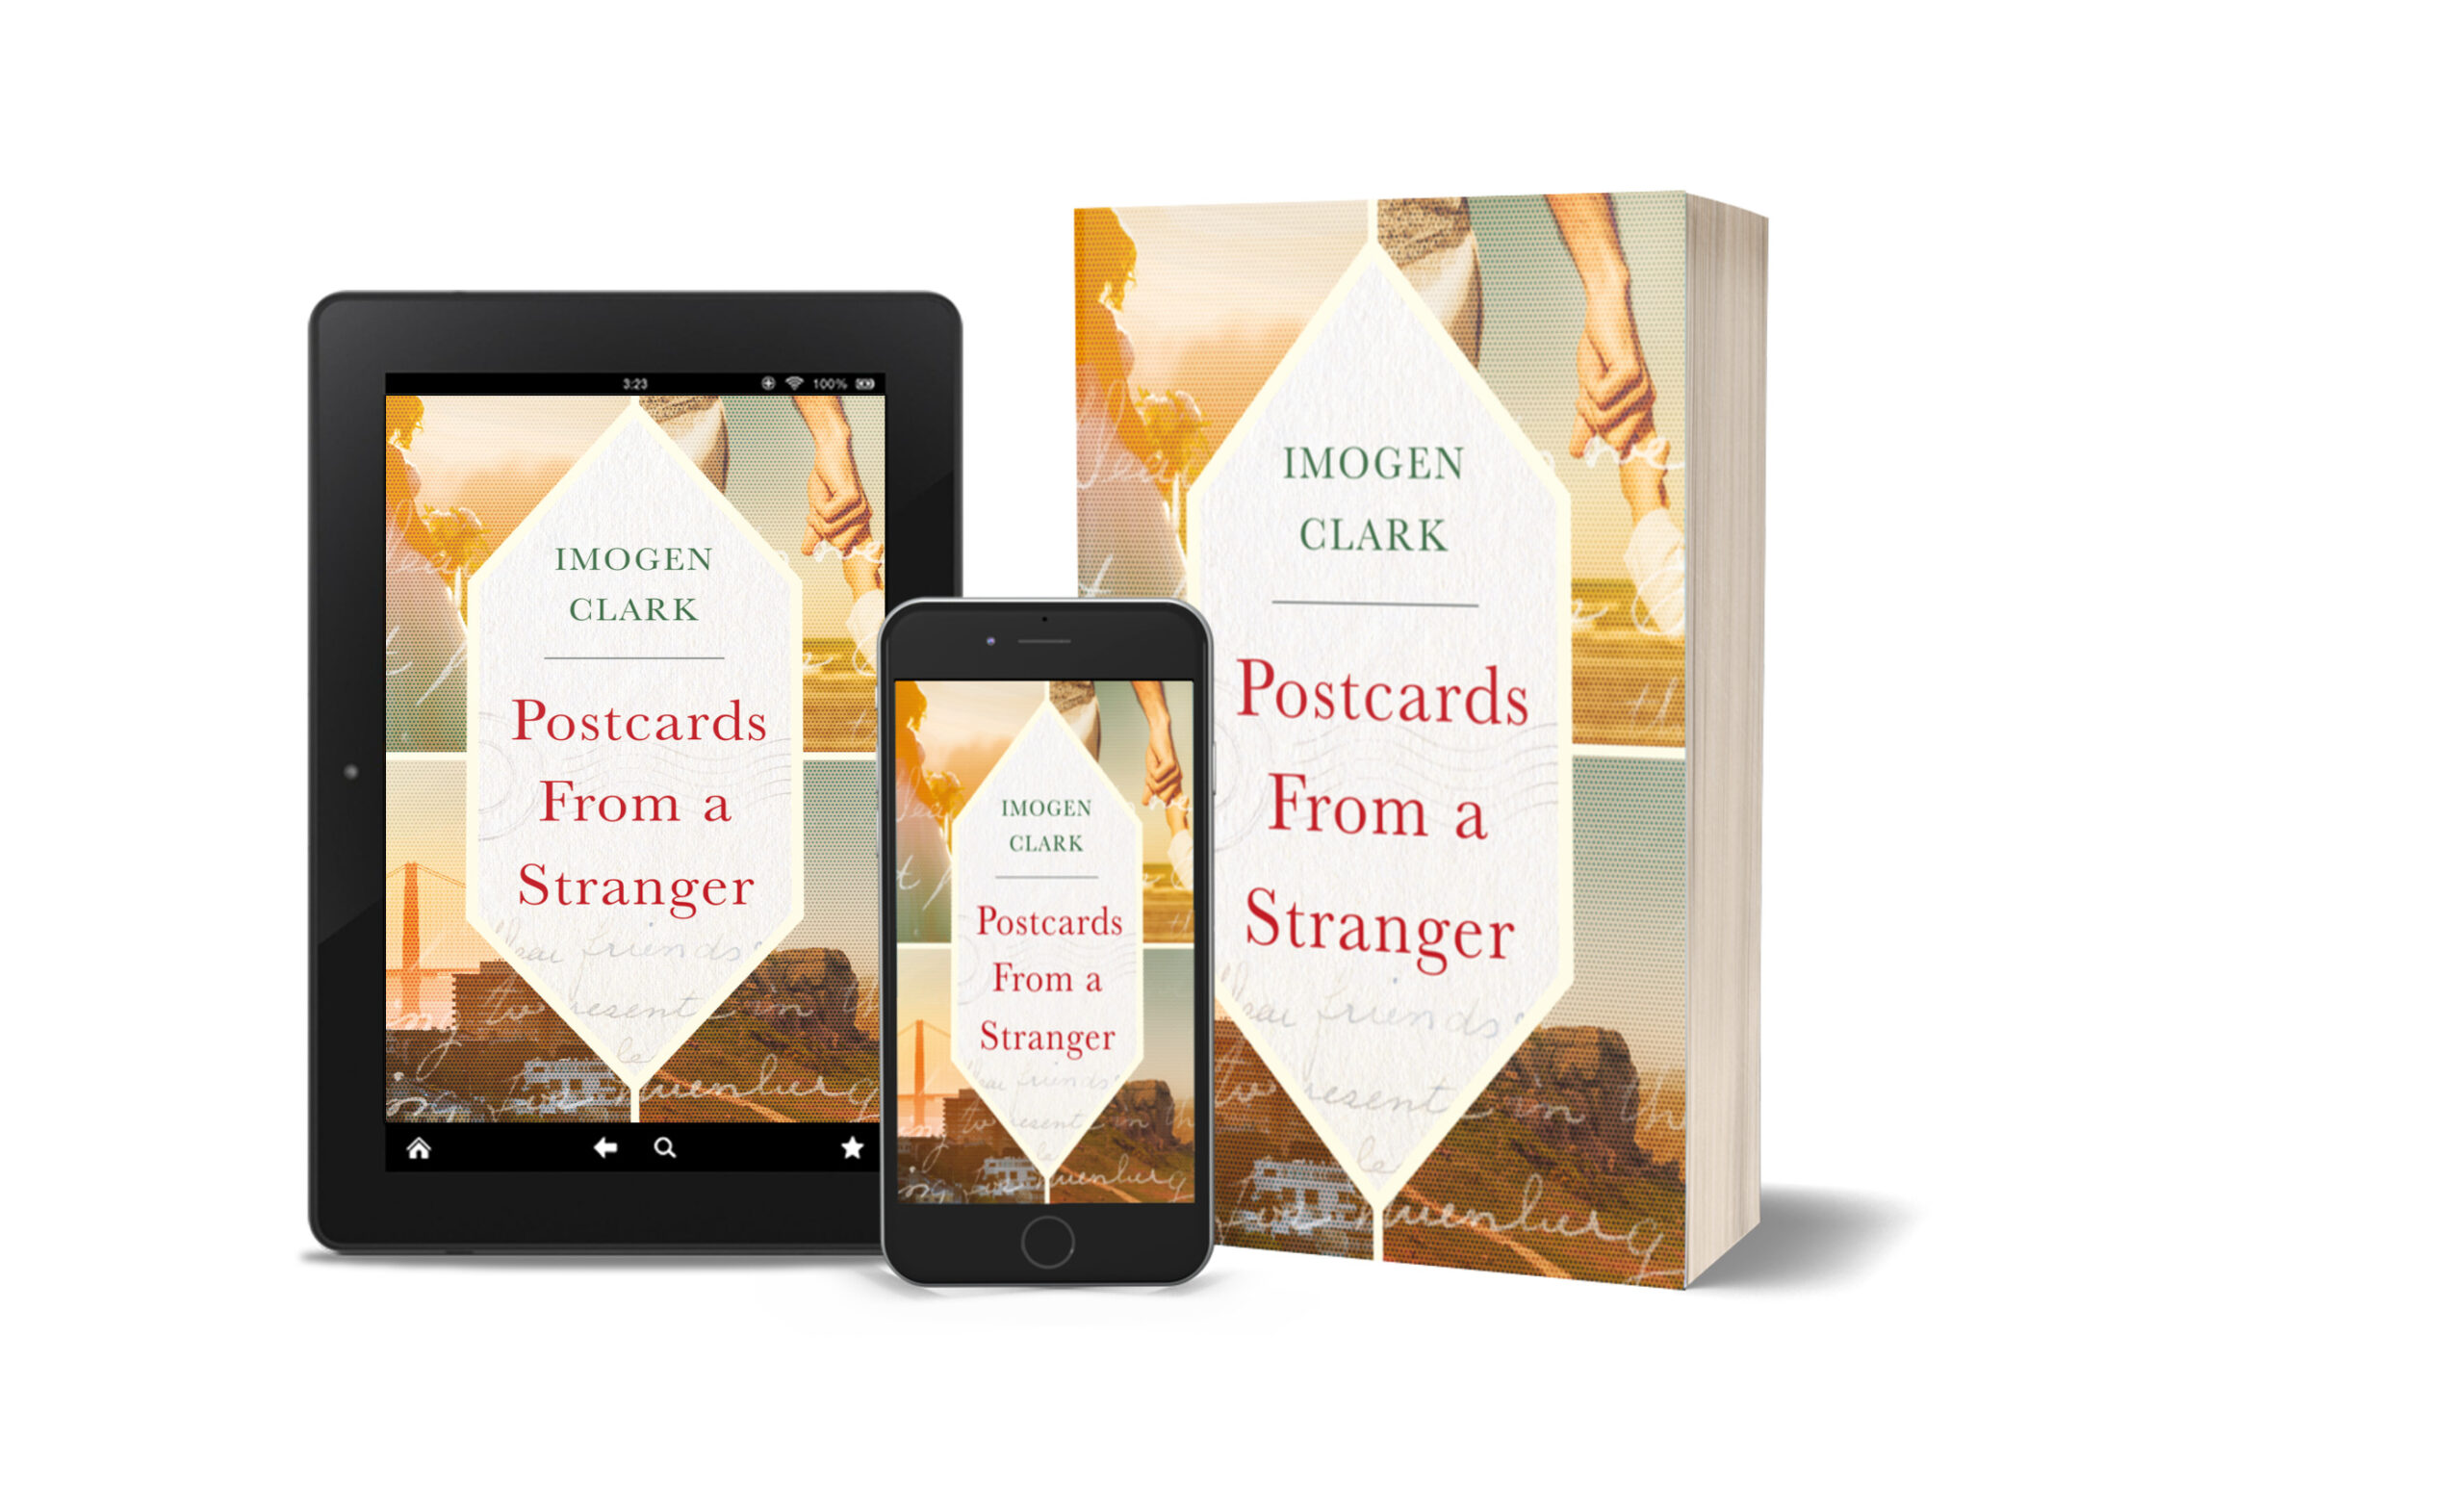 Image shows the book Postcards From a Stranger in kindle, phone and paperback format